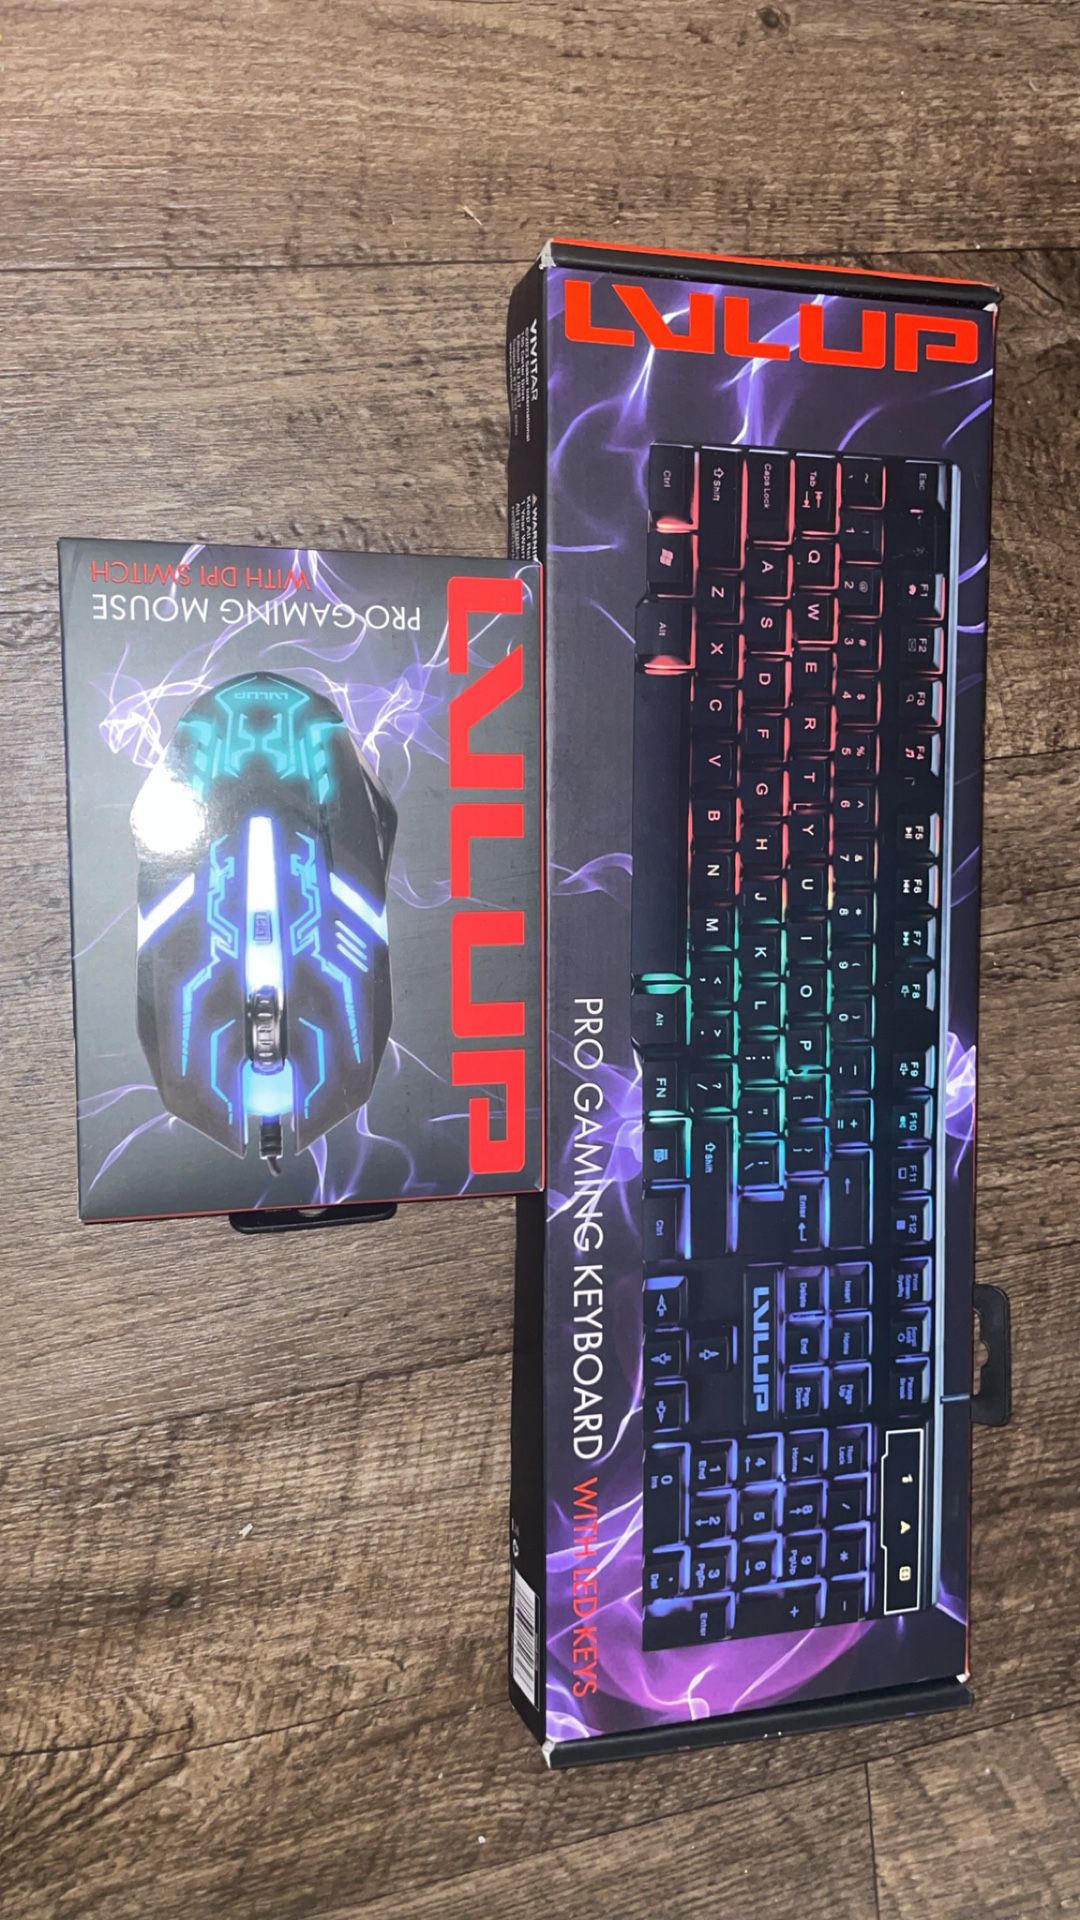 Gaming Keyboard And Mouse Deal!! Brand New(items sold seperately if needed)